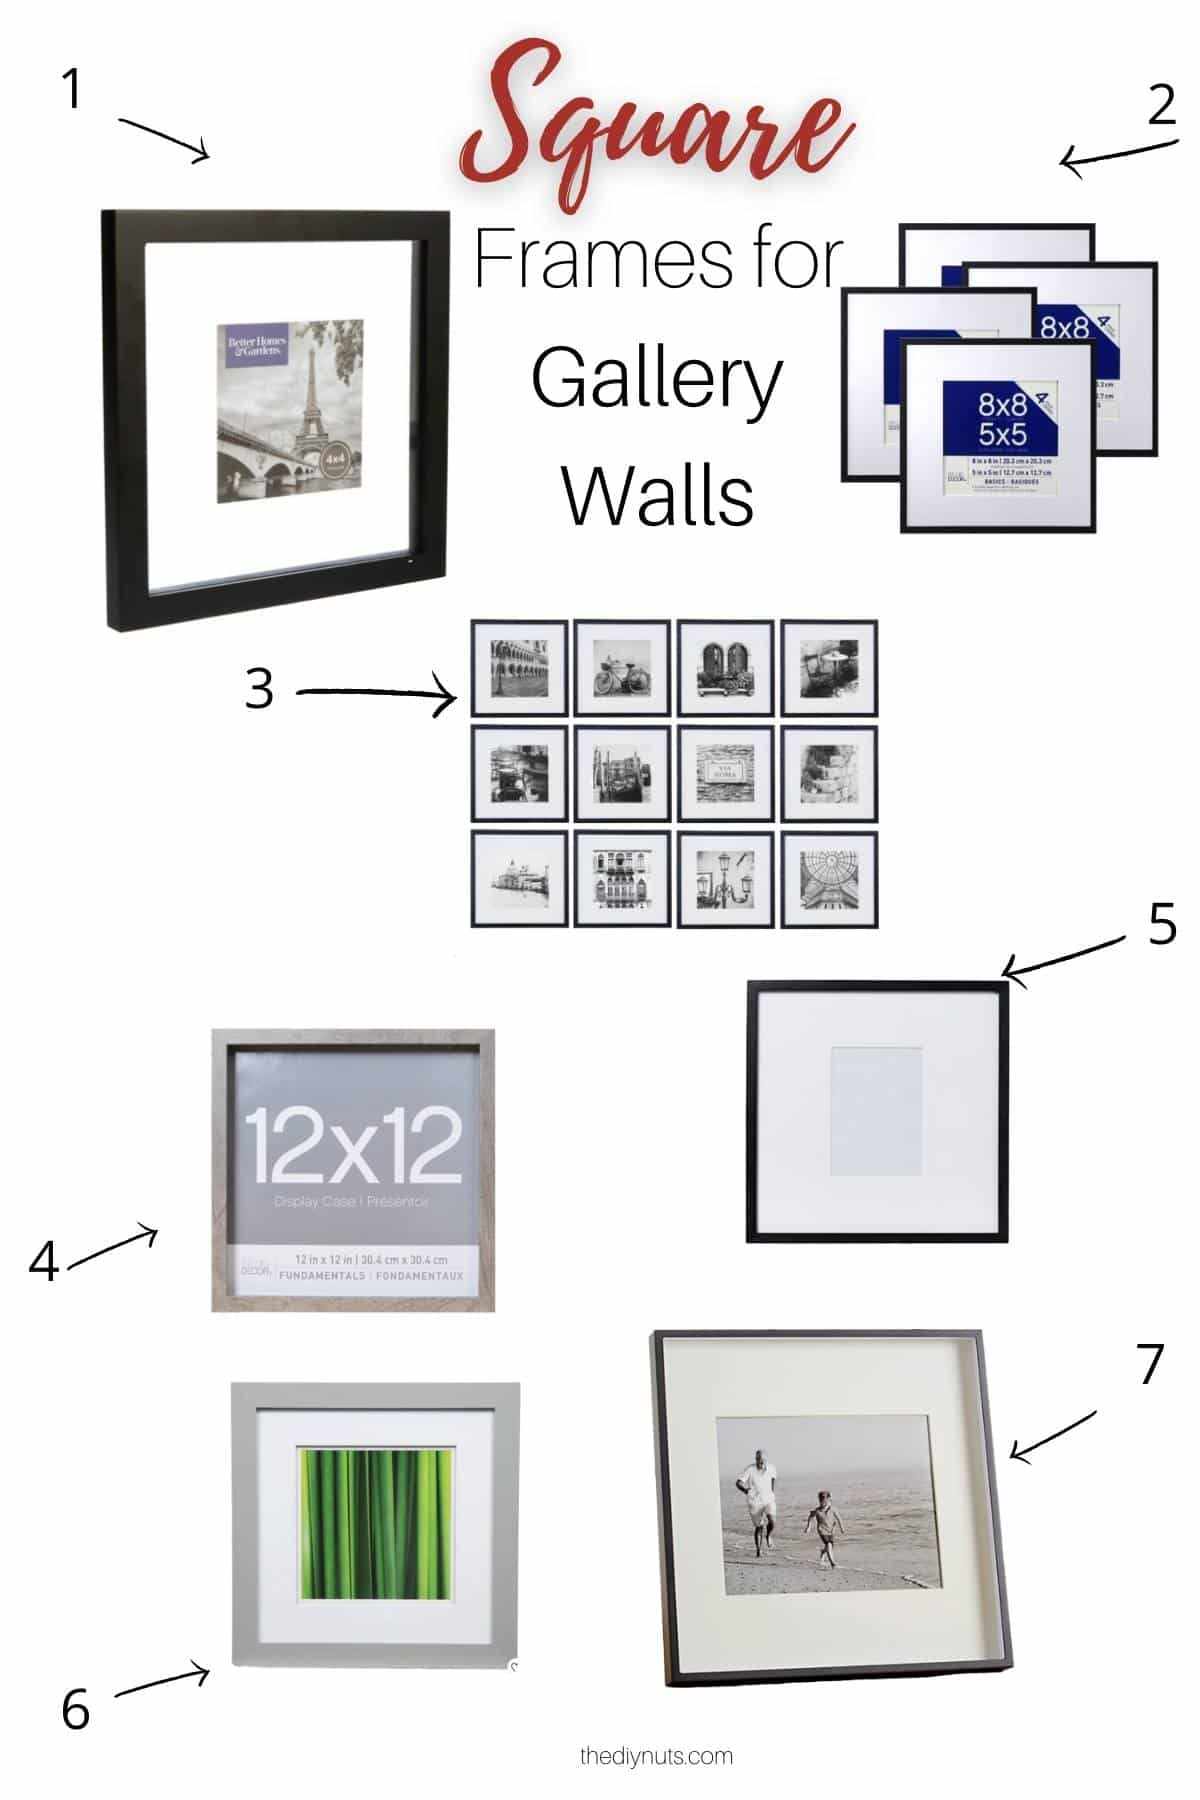 7 different images of square picture frames with text square frames for gallery walls.